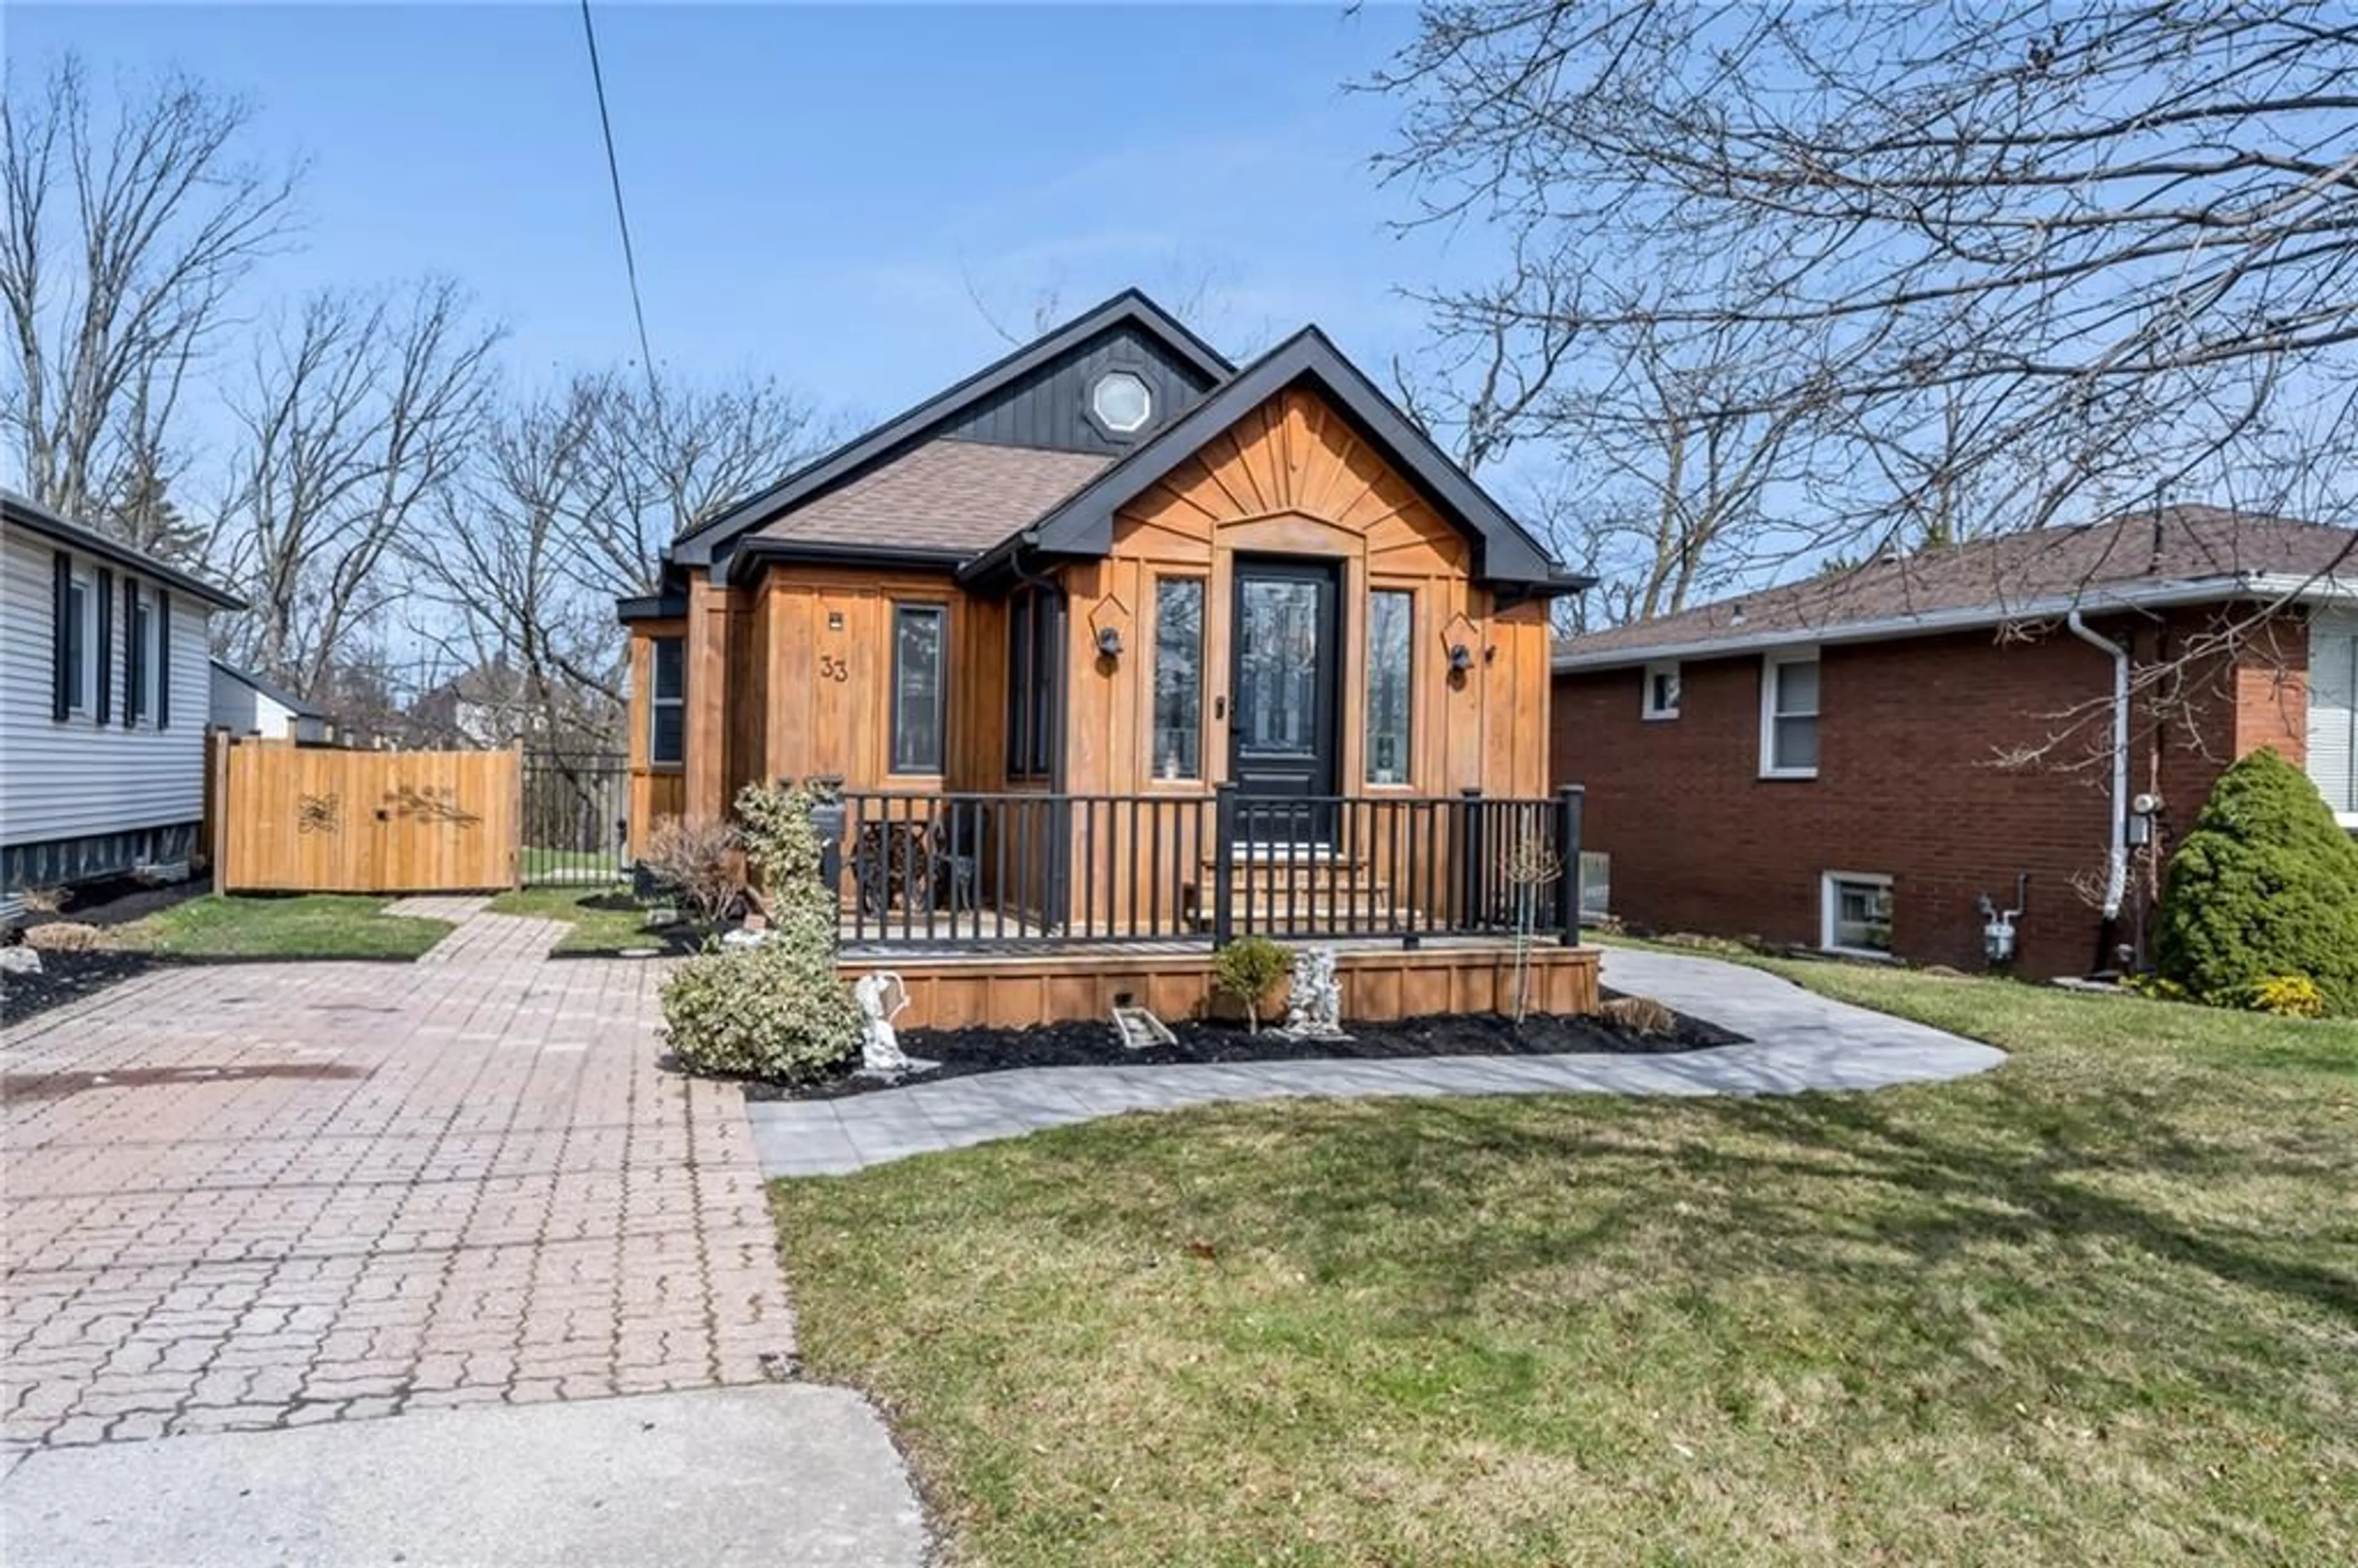 Home with brick exterior material for 33 Rosedale Ave, St. Catharines Ontario L2P 1Y6